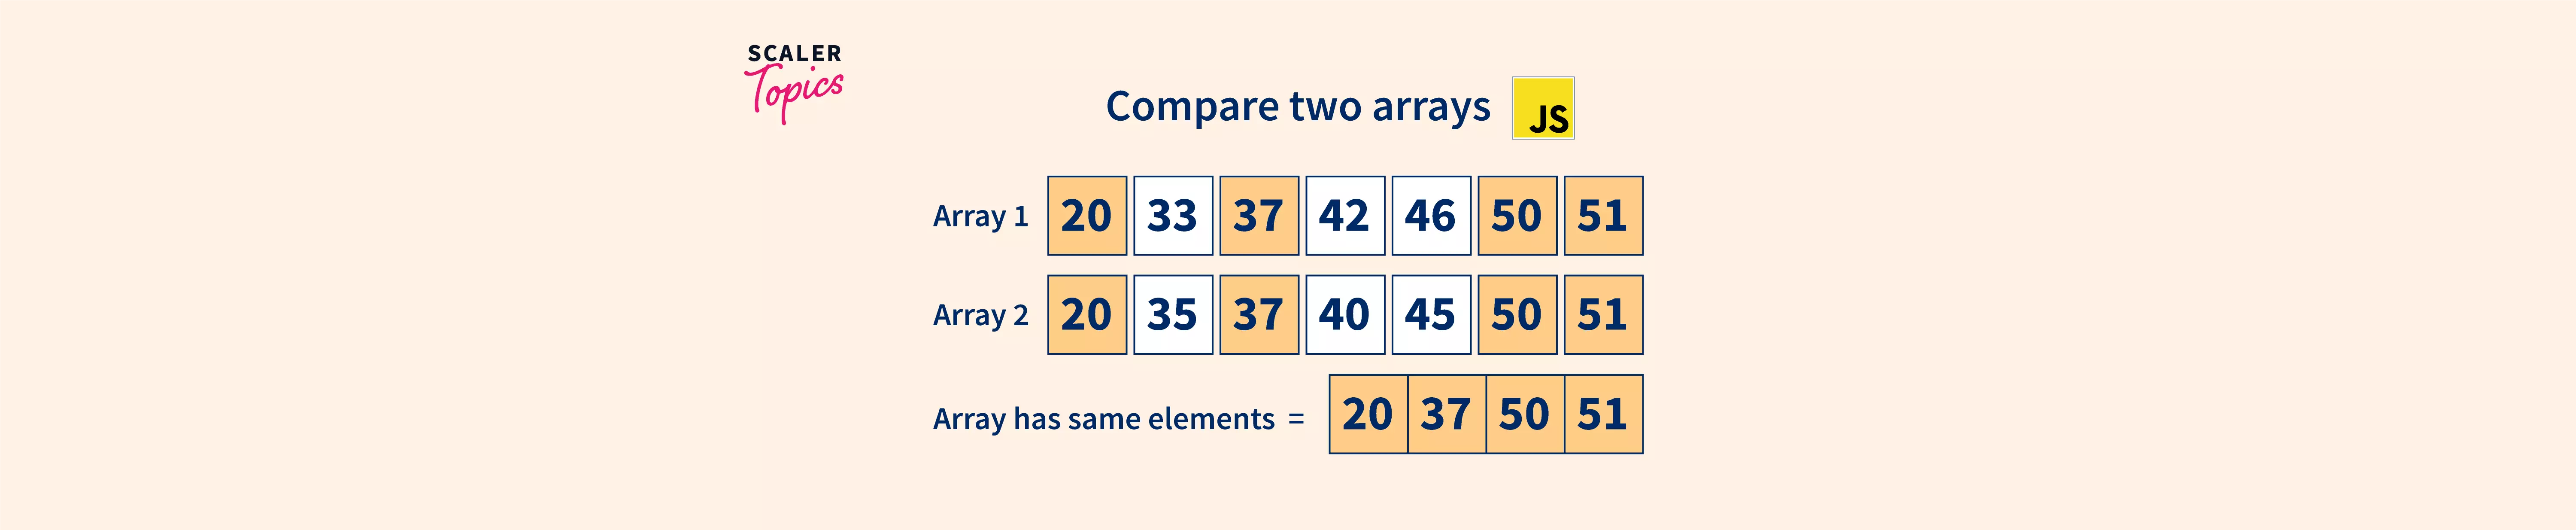 Compare Two Arrays in JavaScript - Scaler